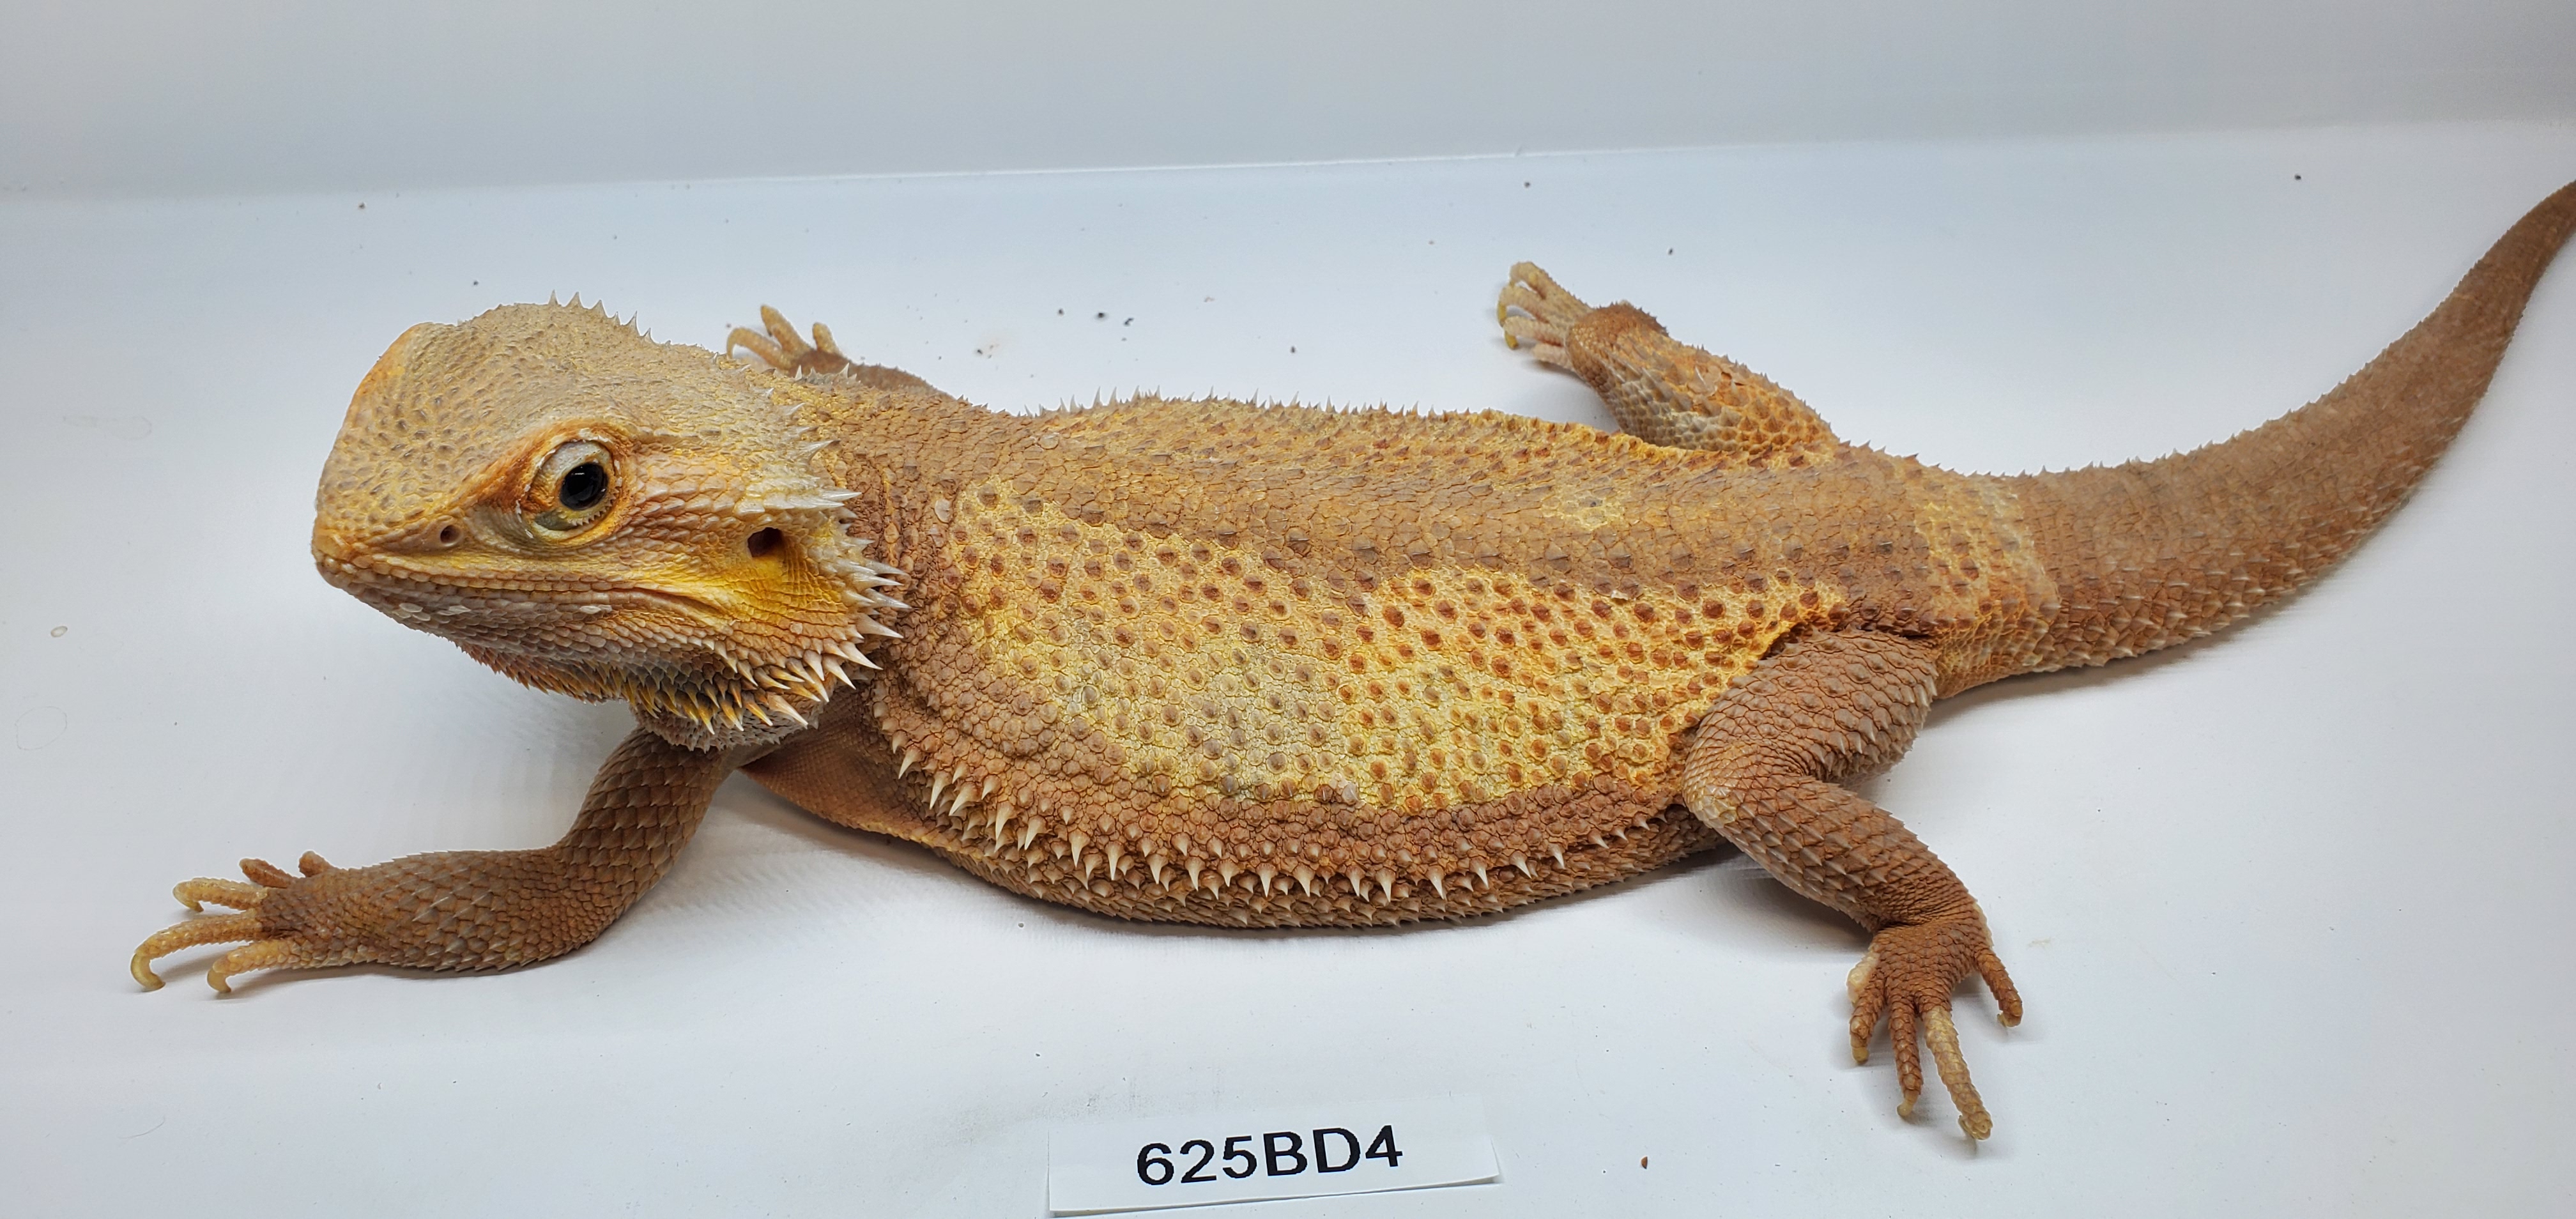 Red Central Bearded Dragon by Tropic Cove Pet Store